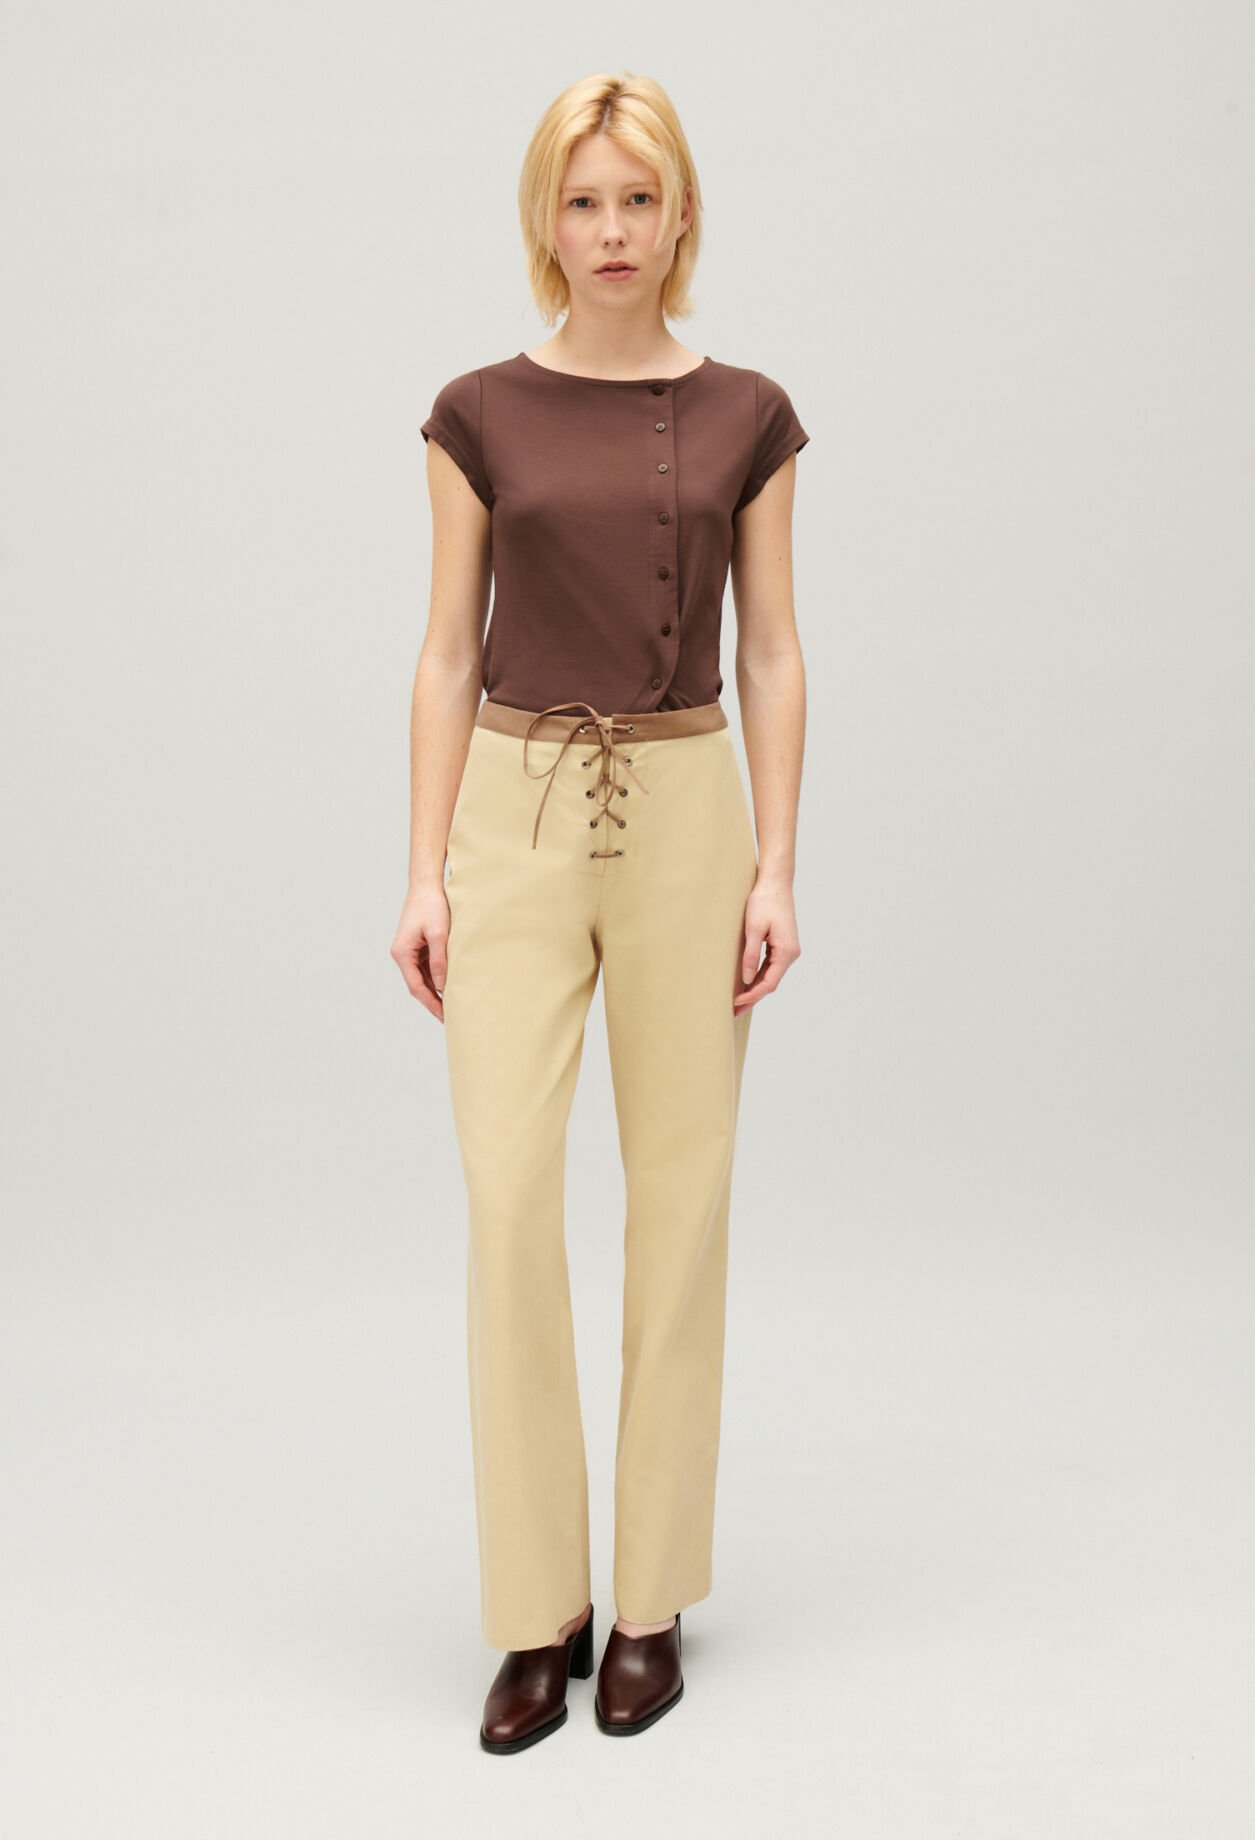 Two-tone lace-up trousers